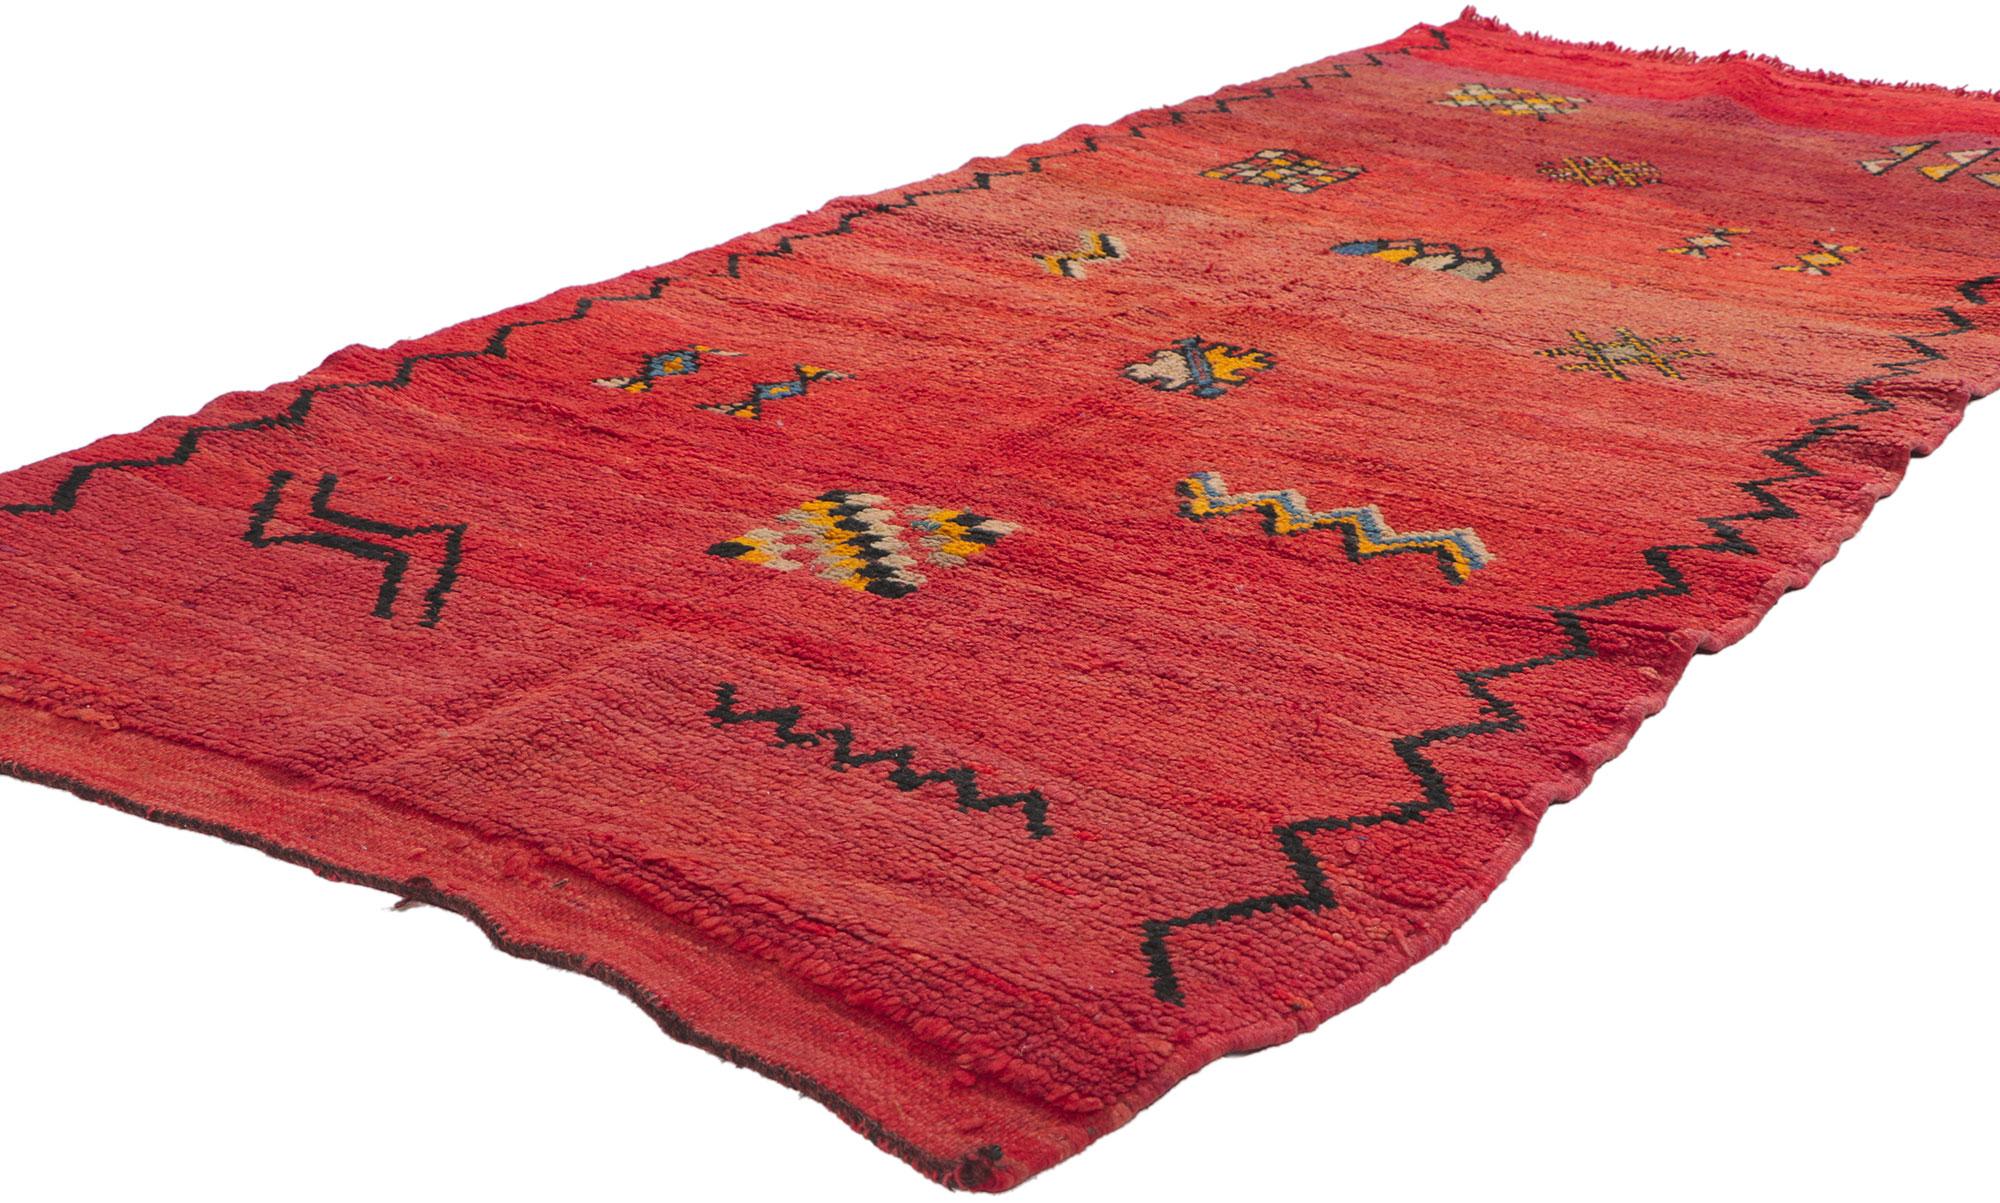 78404 Vintage Red Boujad Moroccan Rug, 03'04 x 07'03. Boujad rugs, hailing from Morocco's Boujad region, are exquisite handwoven masterpieces that celebrate the vibrant artistic legacy of Berber tribes, particularly the Haouz and Rehamna. Bursting